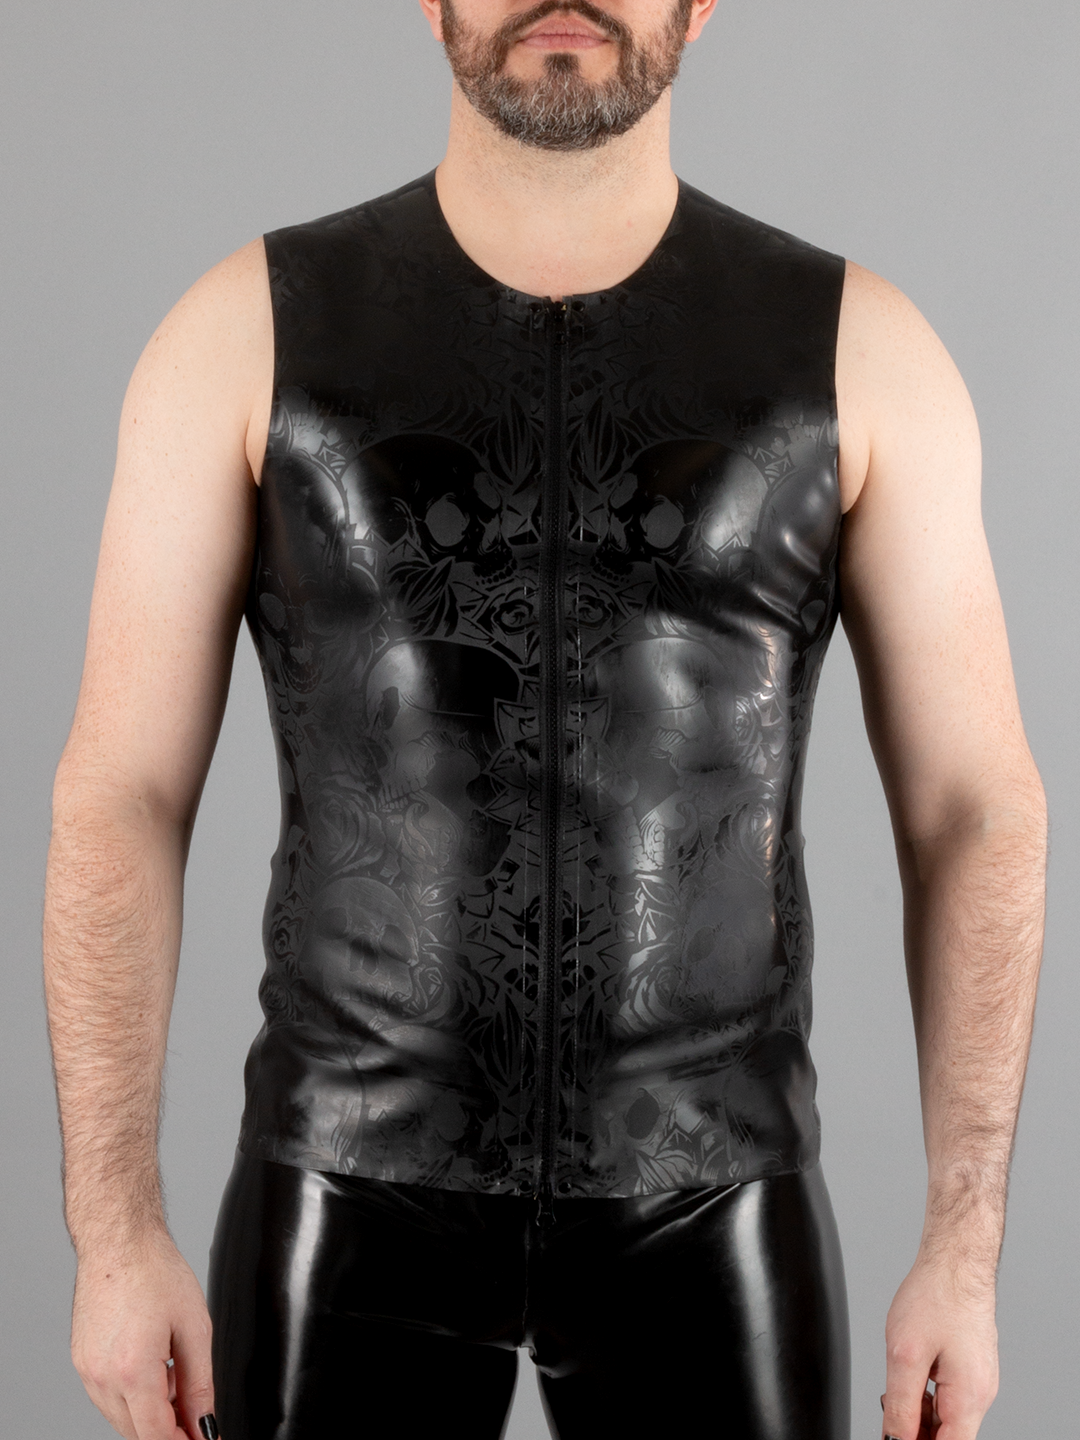 Textured Sleeveless Latex Vest with Skull and Roses